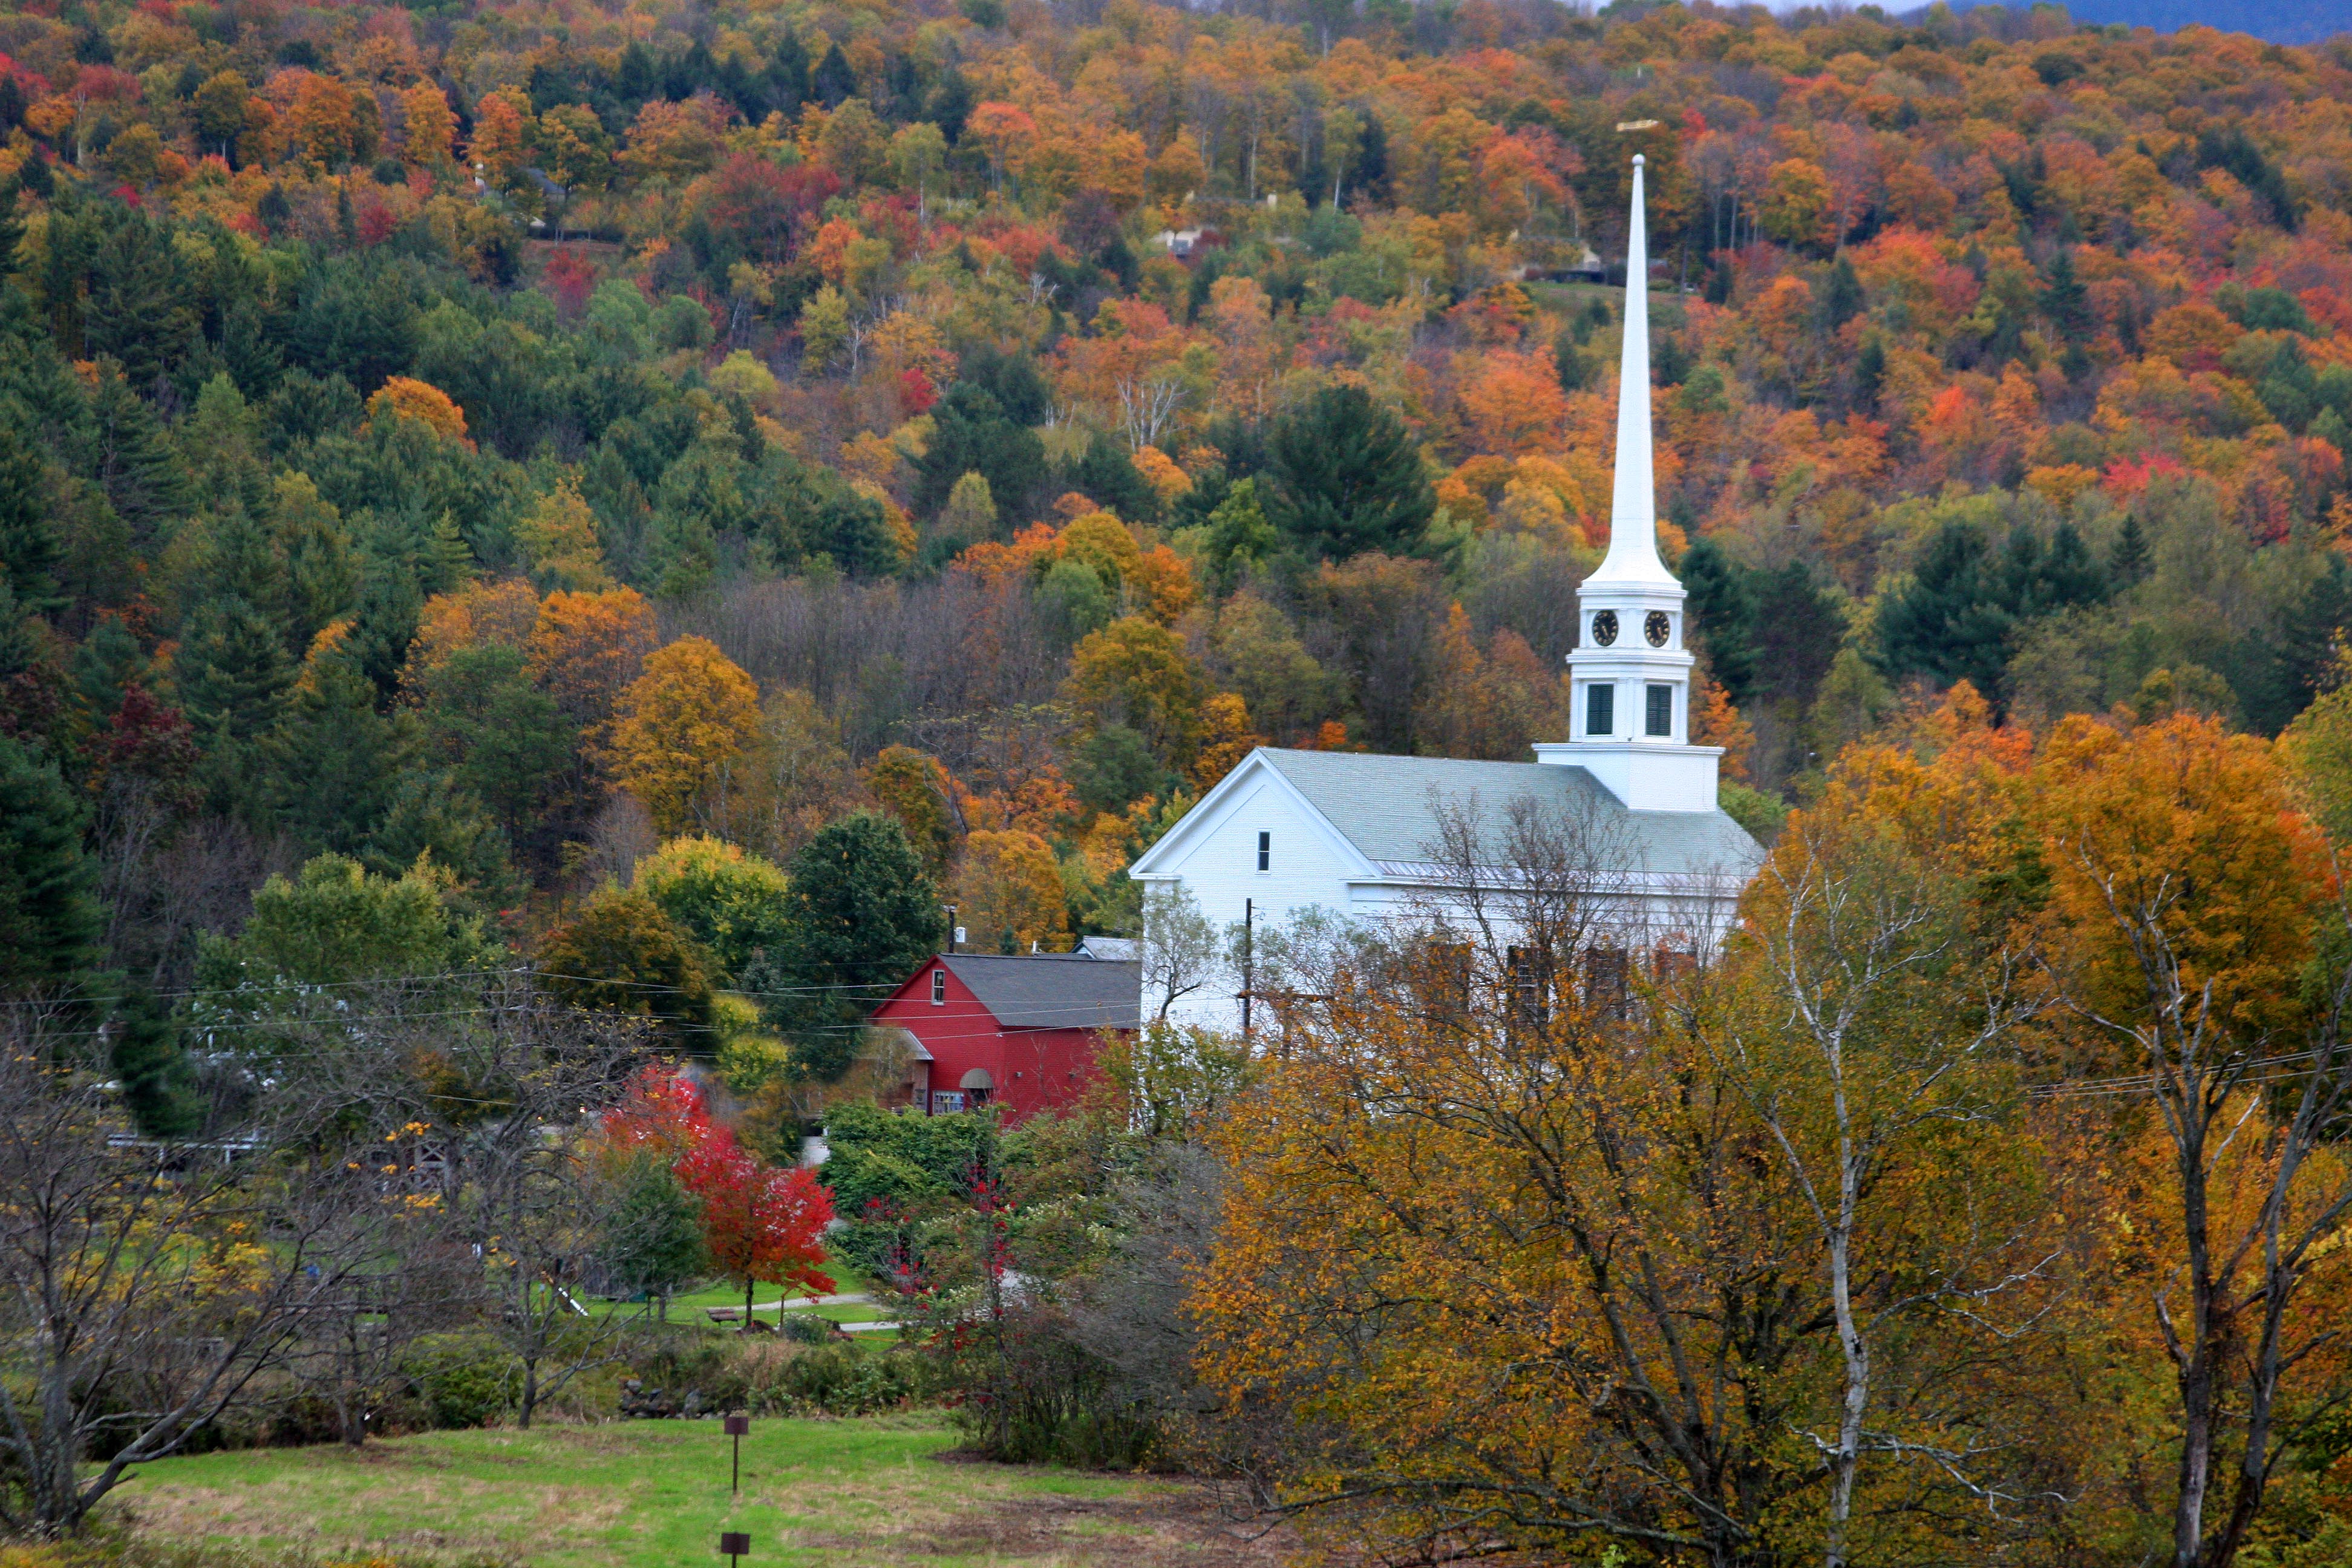 Best Foliage Drive in New England?